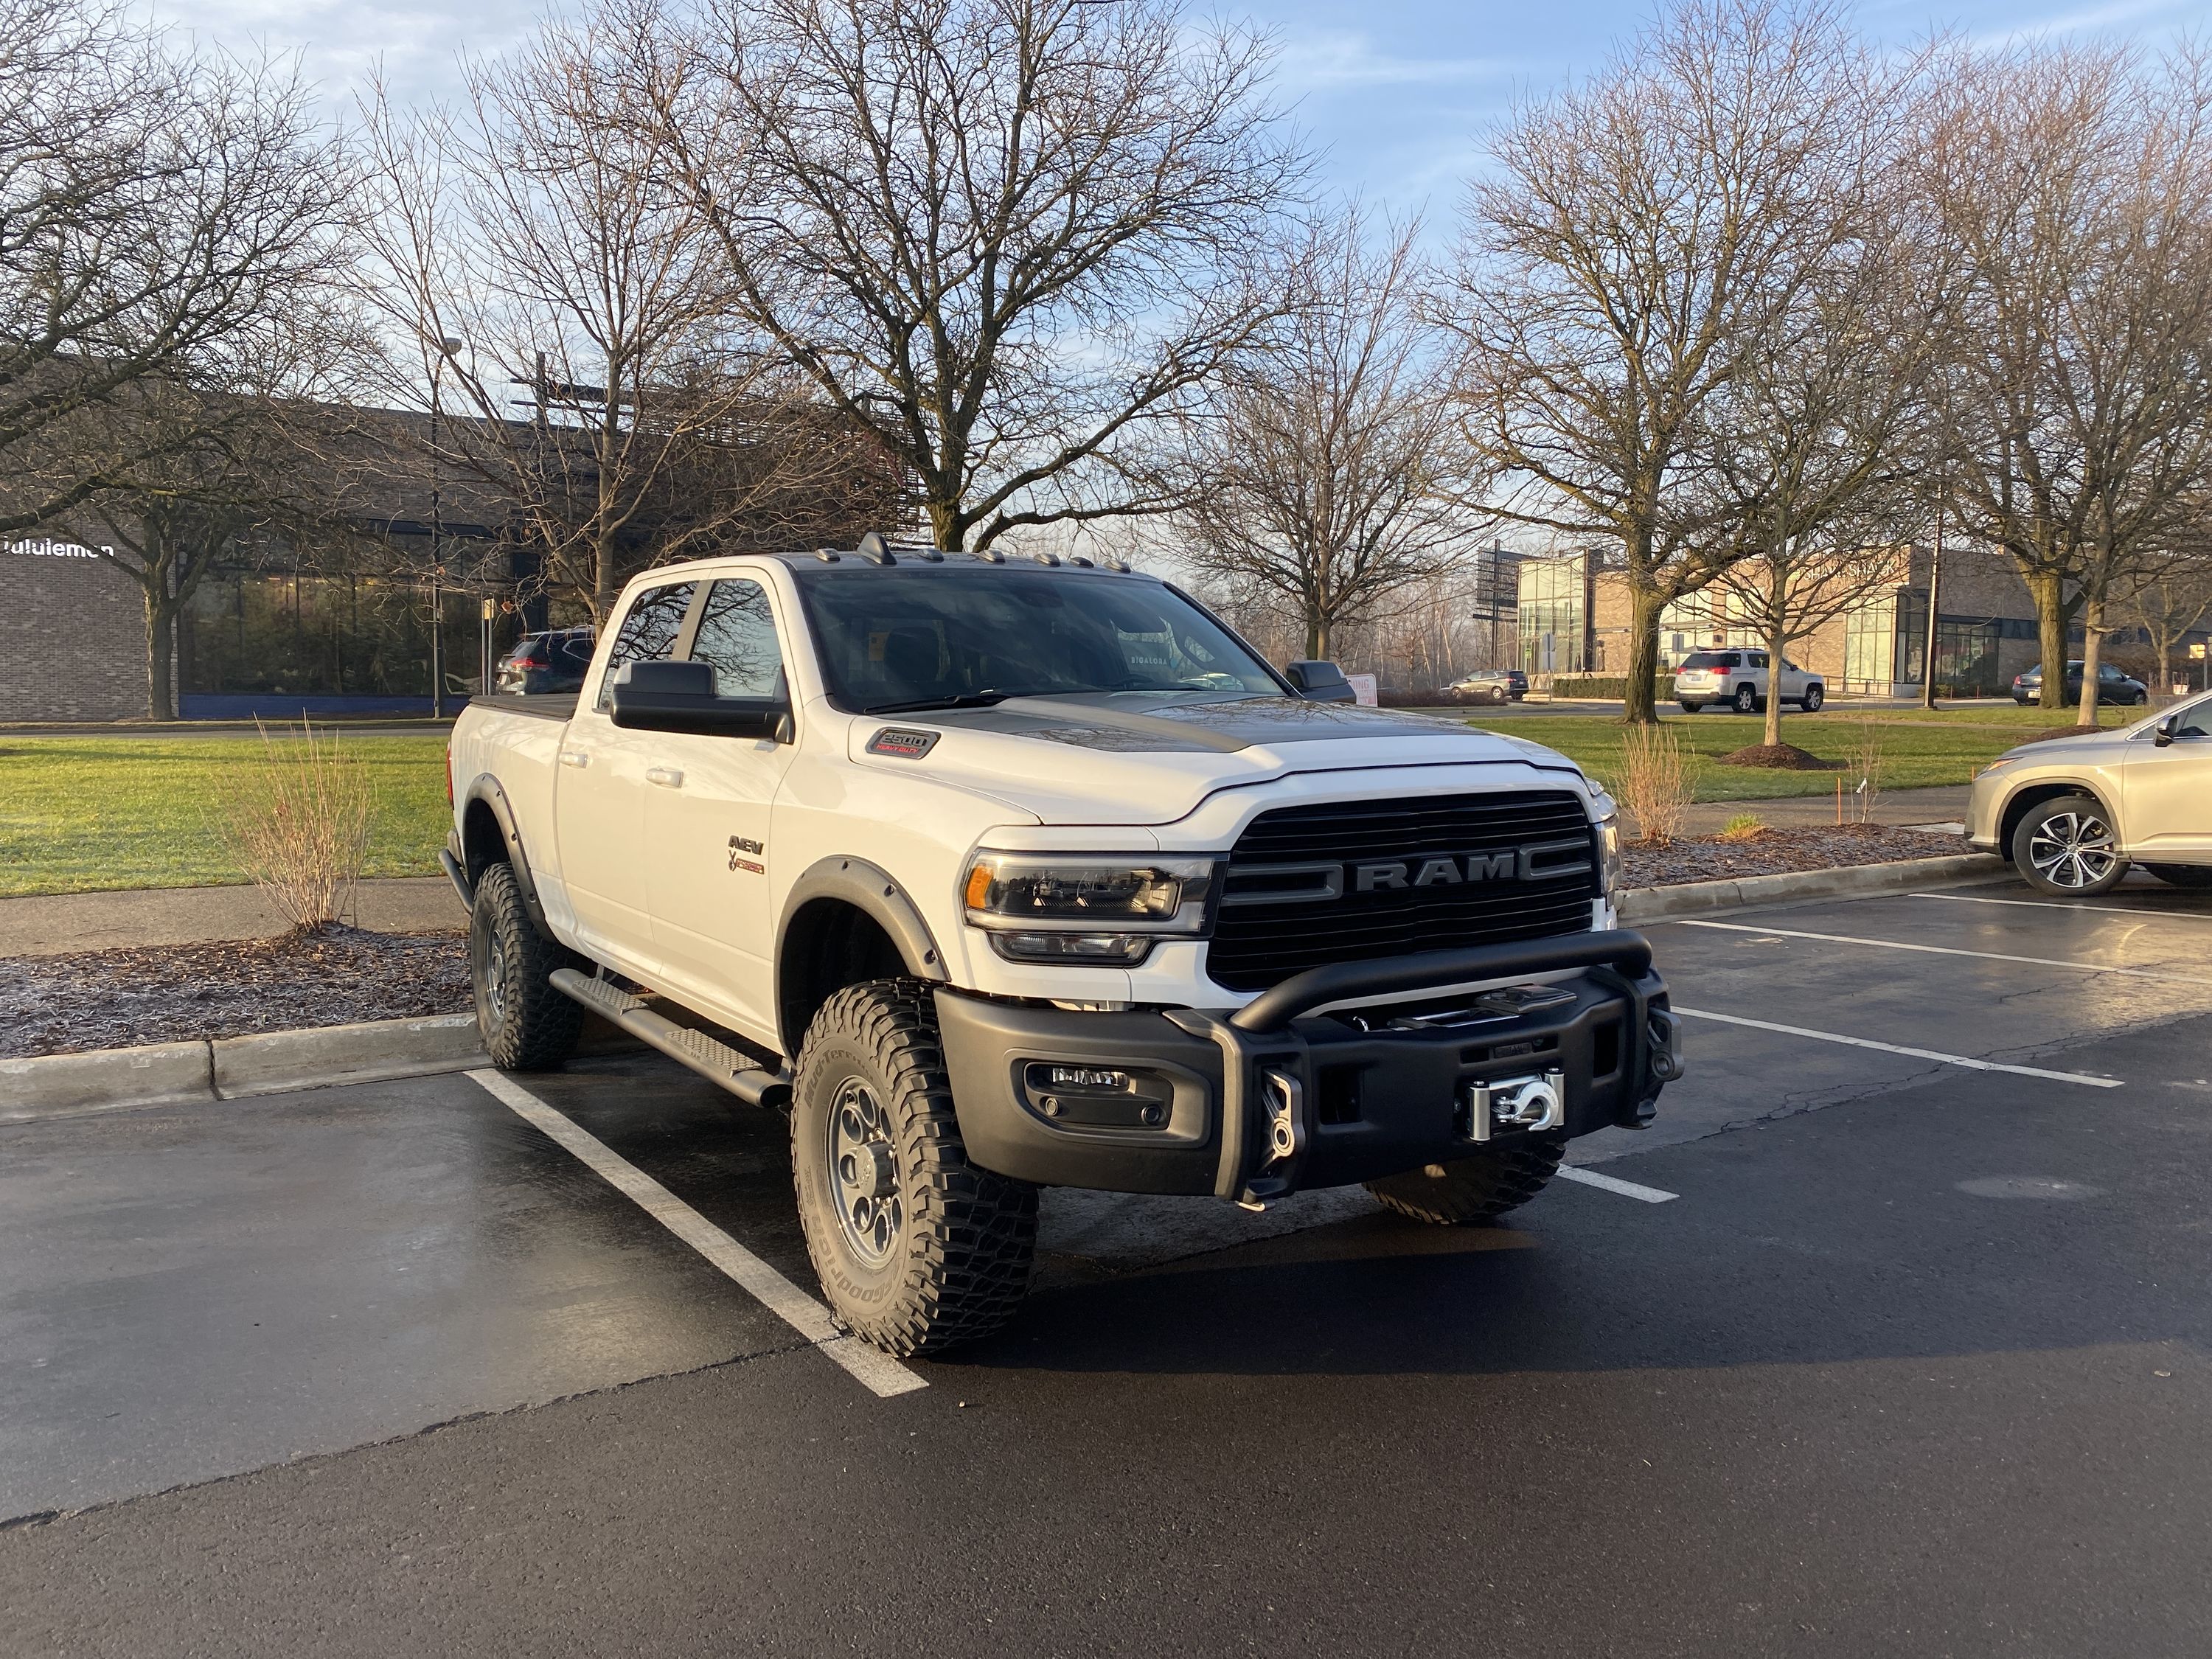 Somewhere in Michigan, right after picking up the truck from AEV. Fun fact: our truck was built for the AEV 2020 brochure!